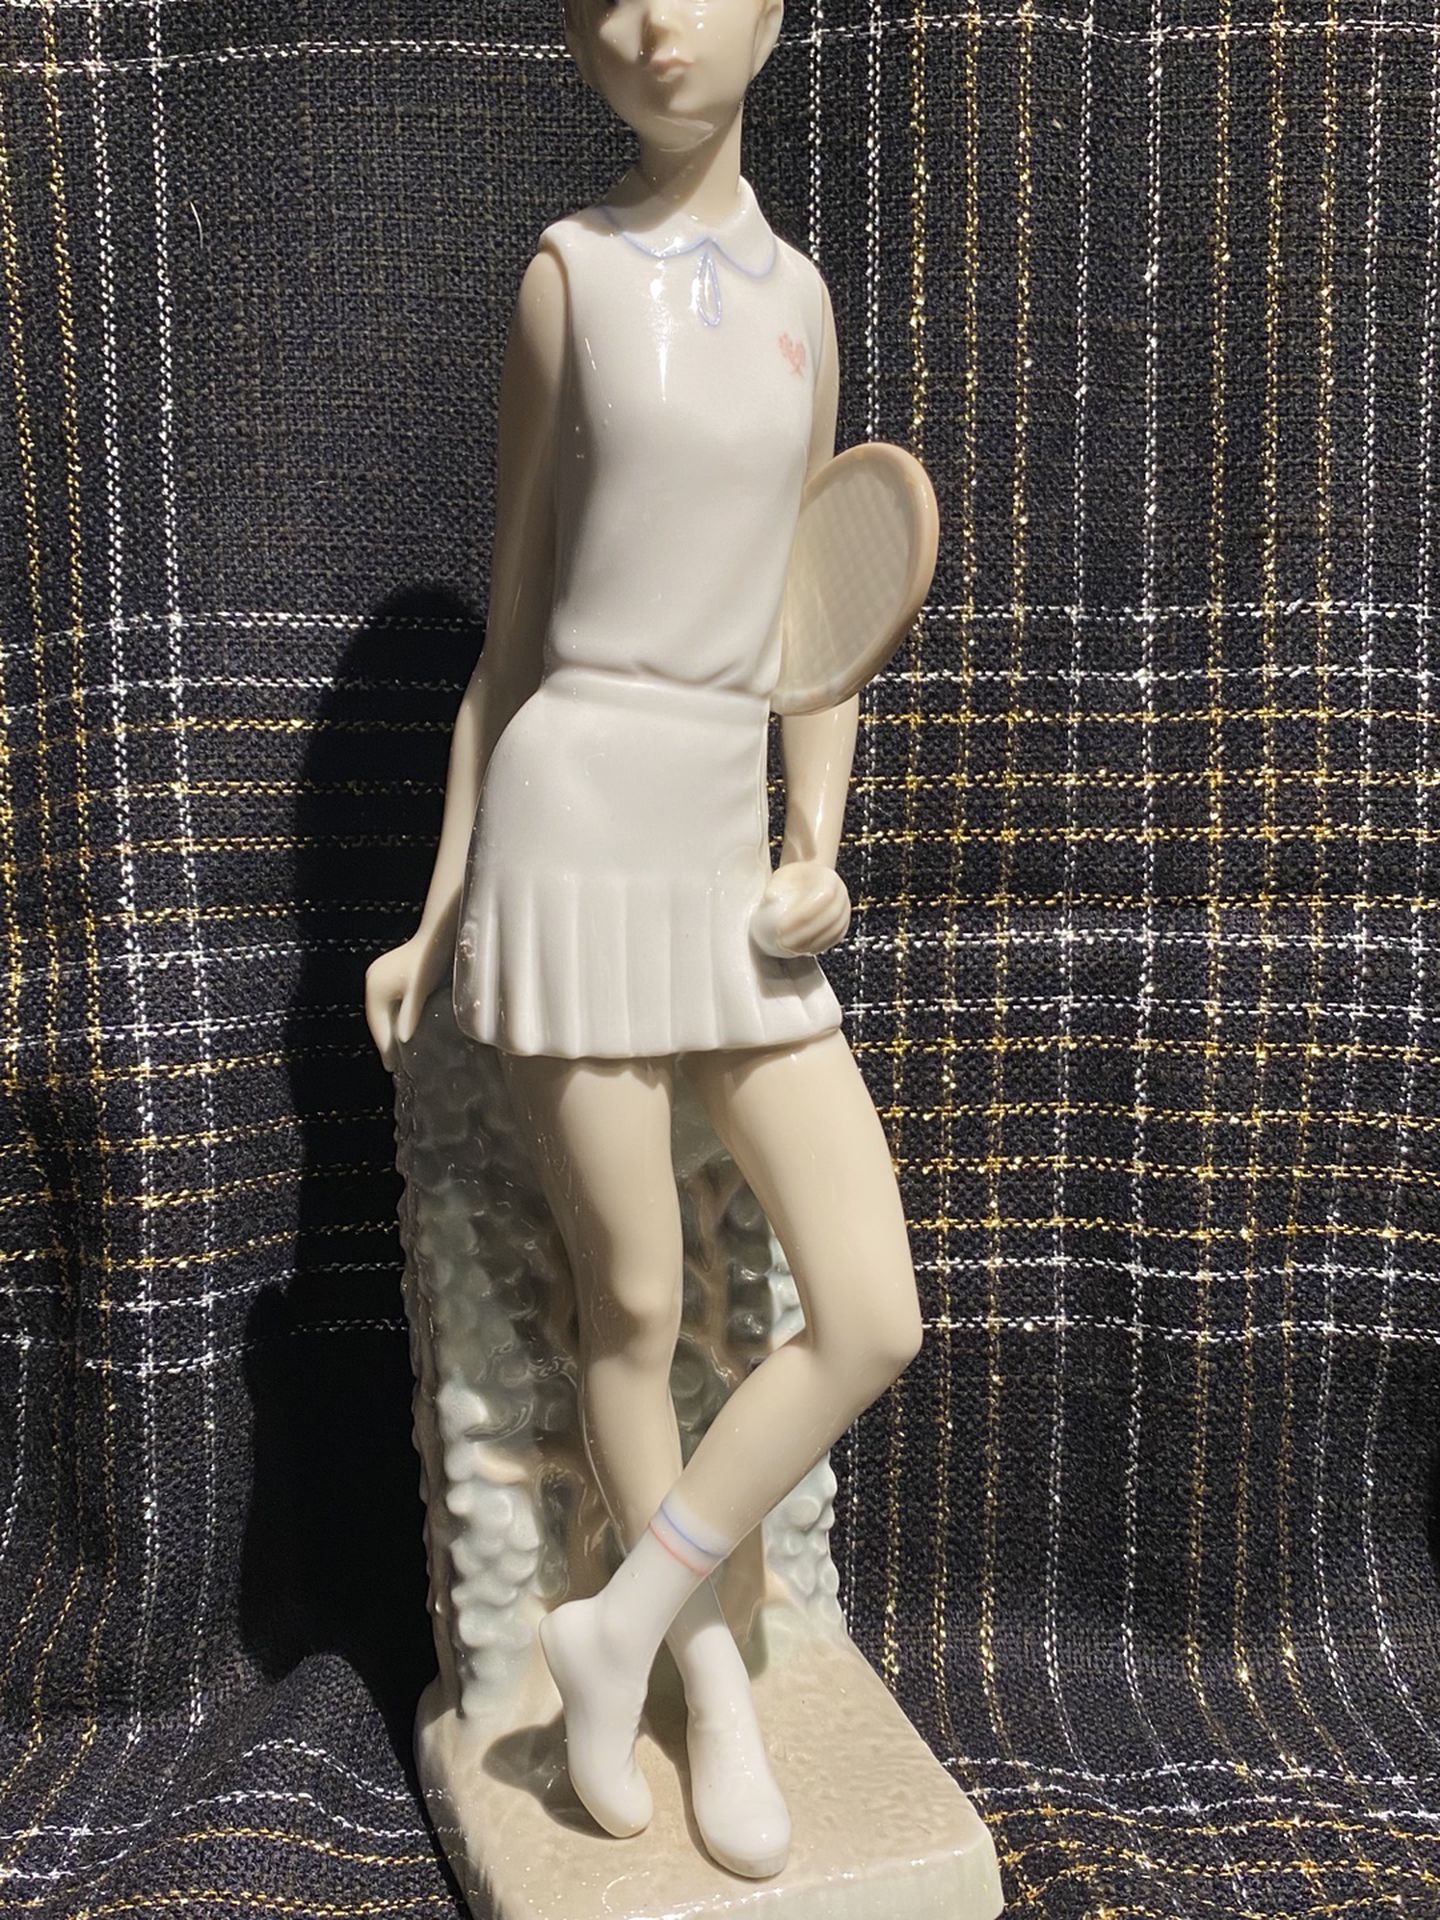 Lladro Tennis Player Girl, Glazed Finish, Height Approx 10-12”